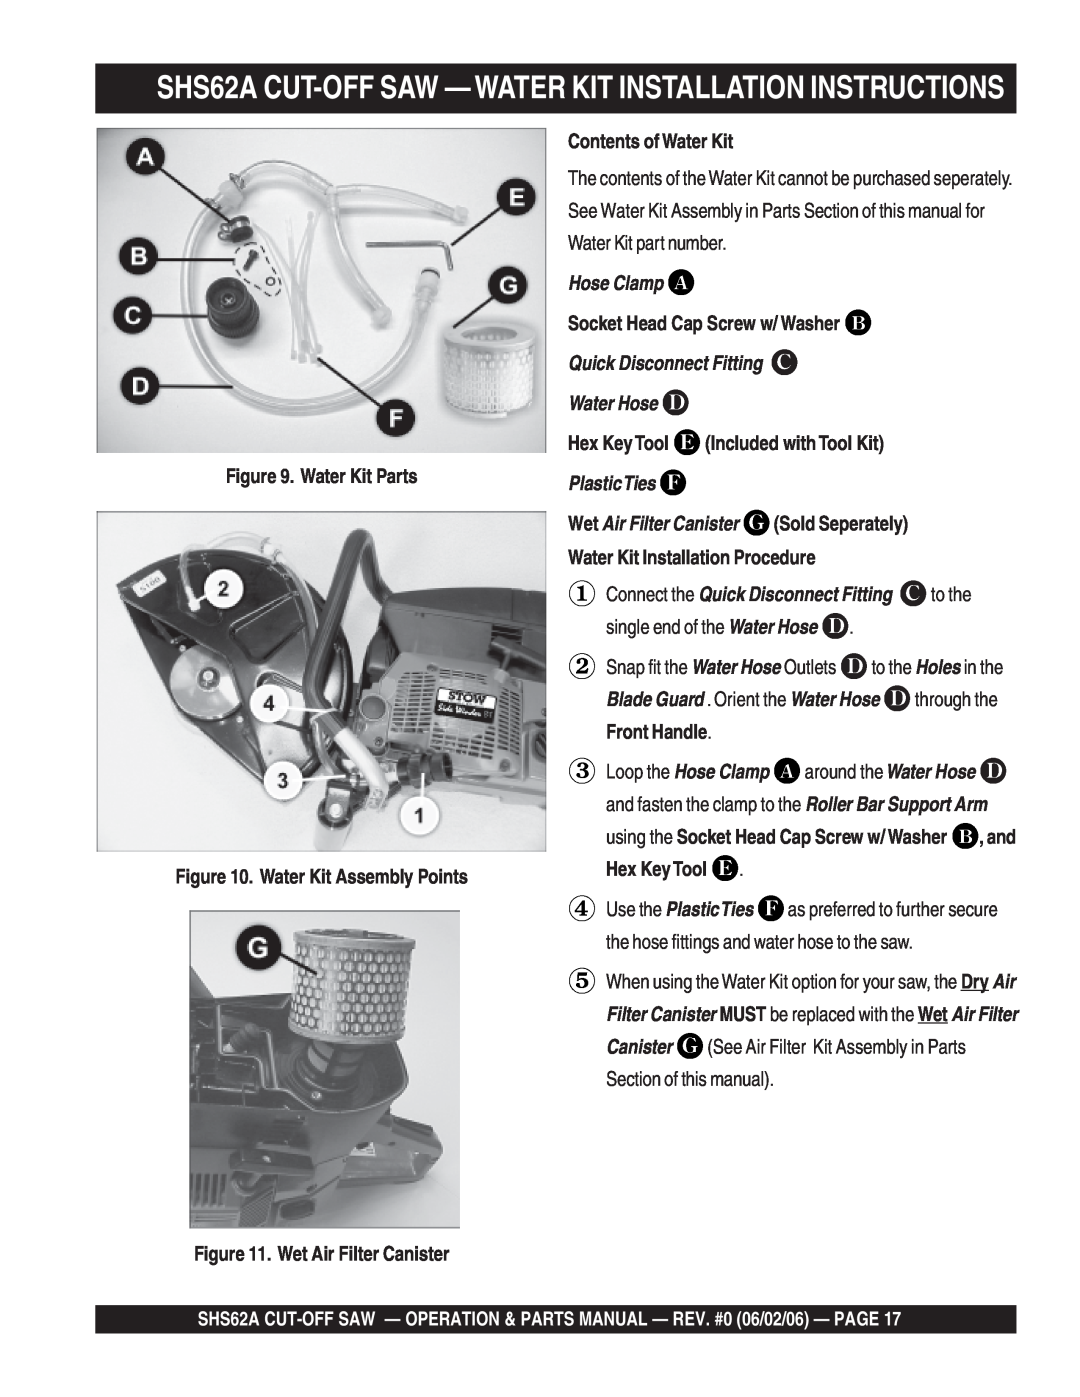 Stow SHS62A CUT-OFF SAW - WATER KIT INSTALLATION INSTRUCTIONS, Water Kit Parts . Water Kit Assembly Points, Water Hose 